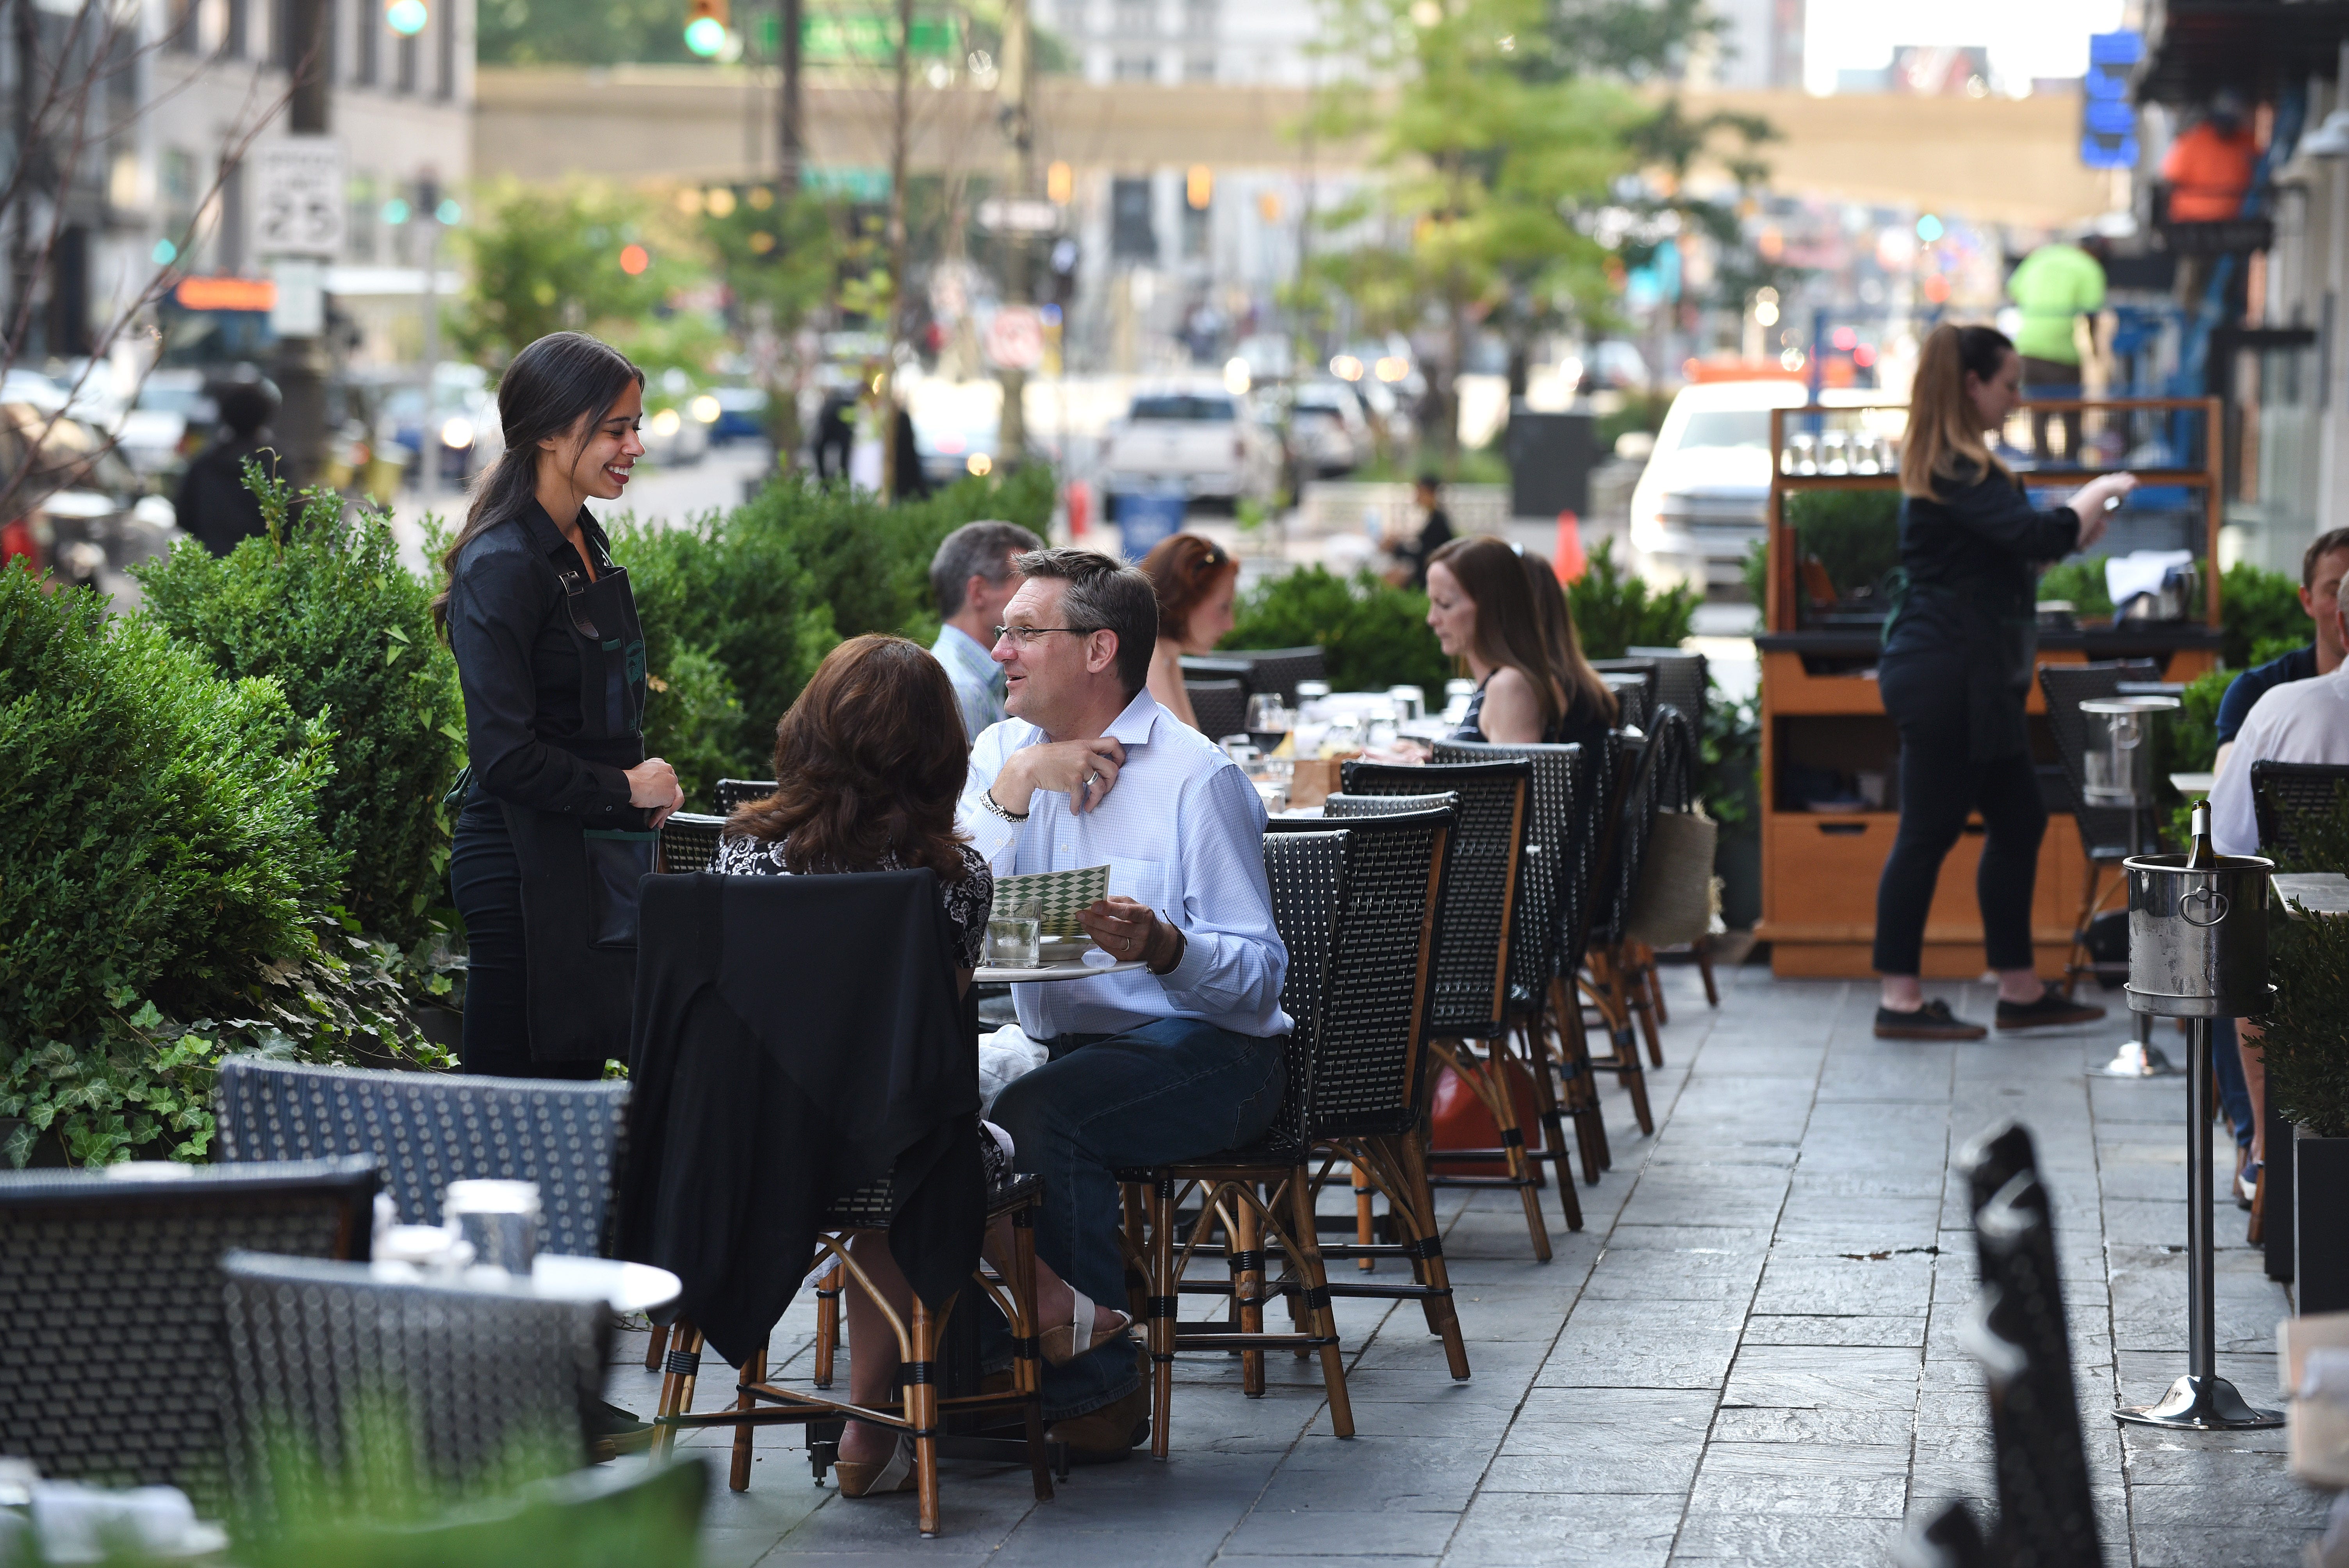 People enjoy the patio area at the San Morello restaurant along Woodward Avenue in Detroit.